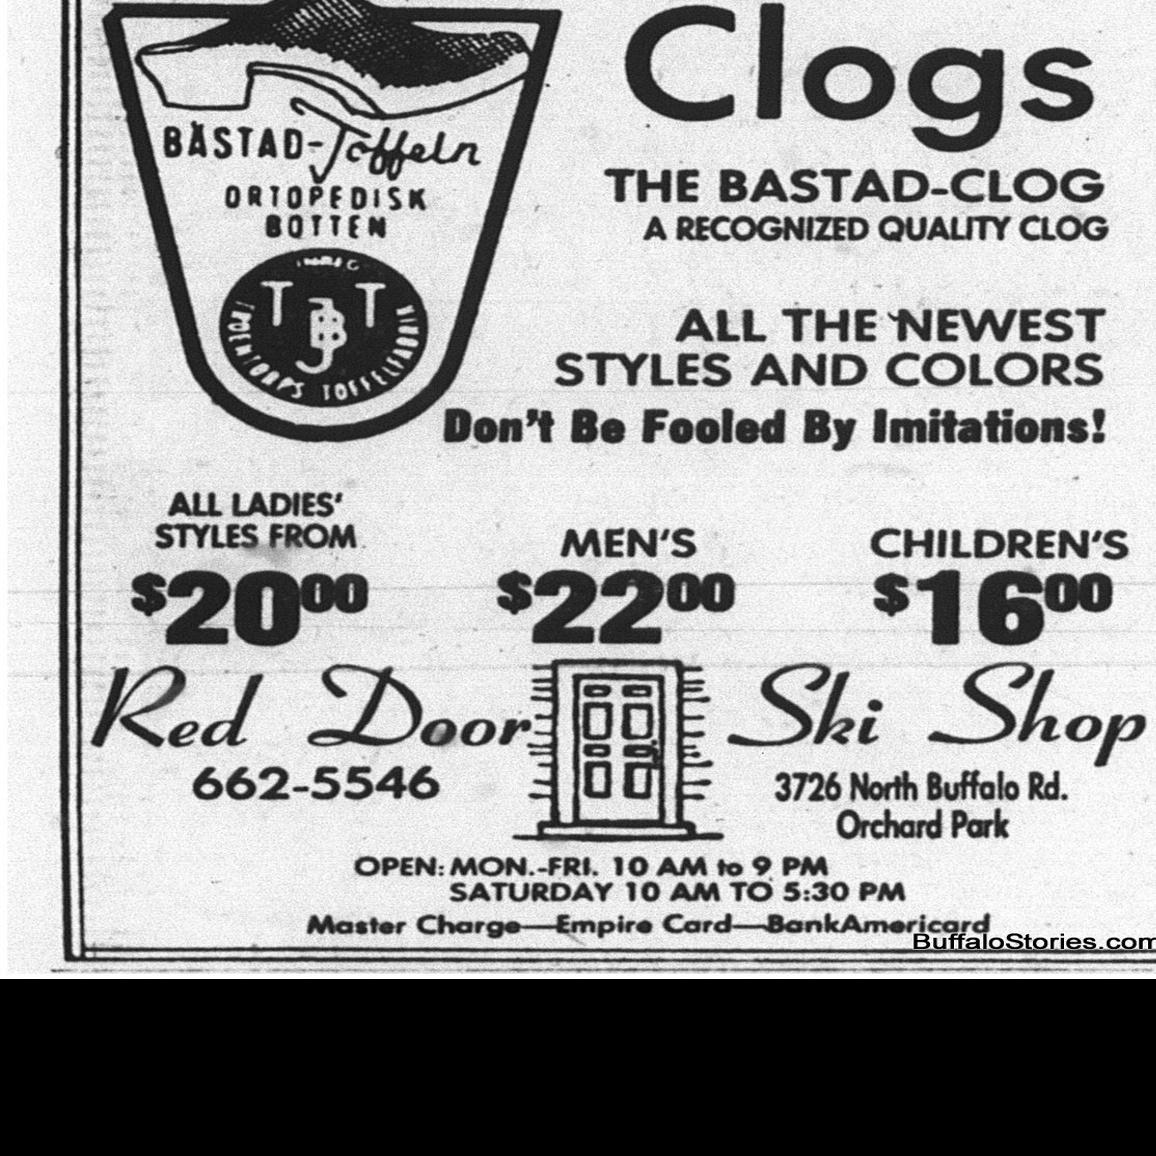 April 24, 1975: Where did you buy Bastad clogs? | History |